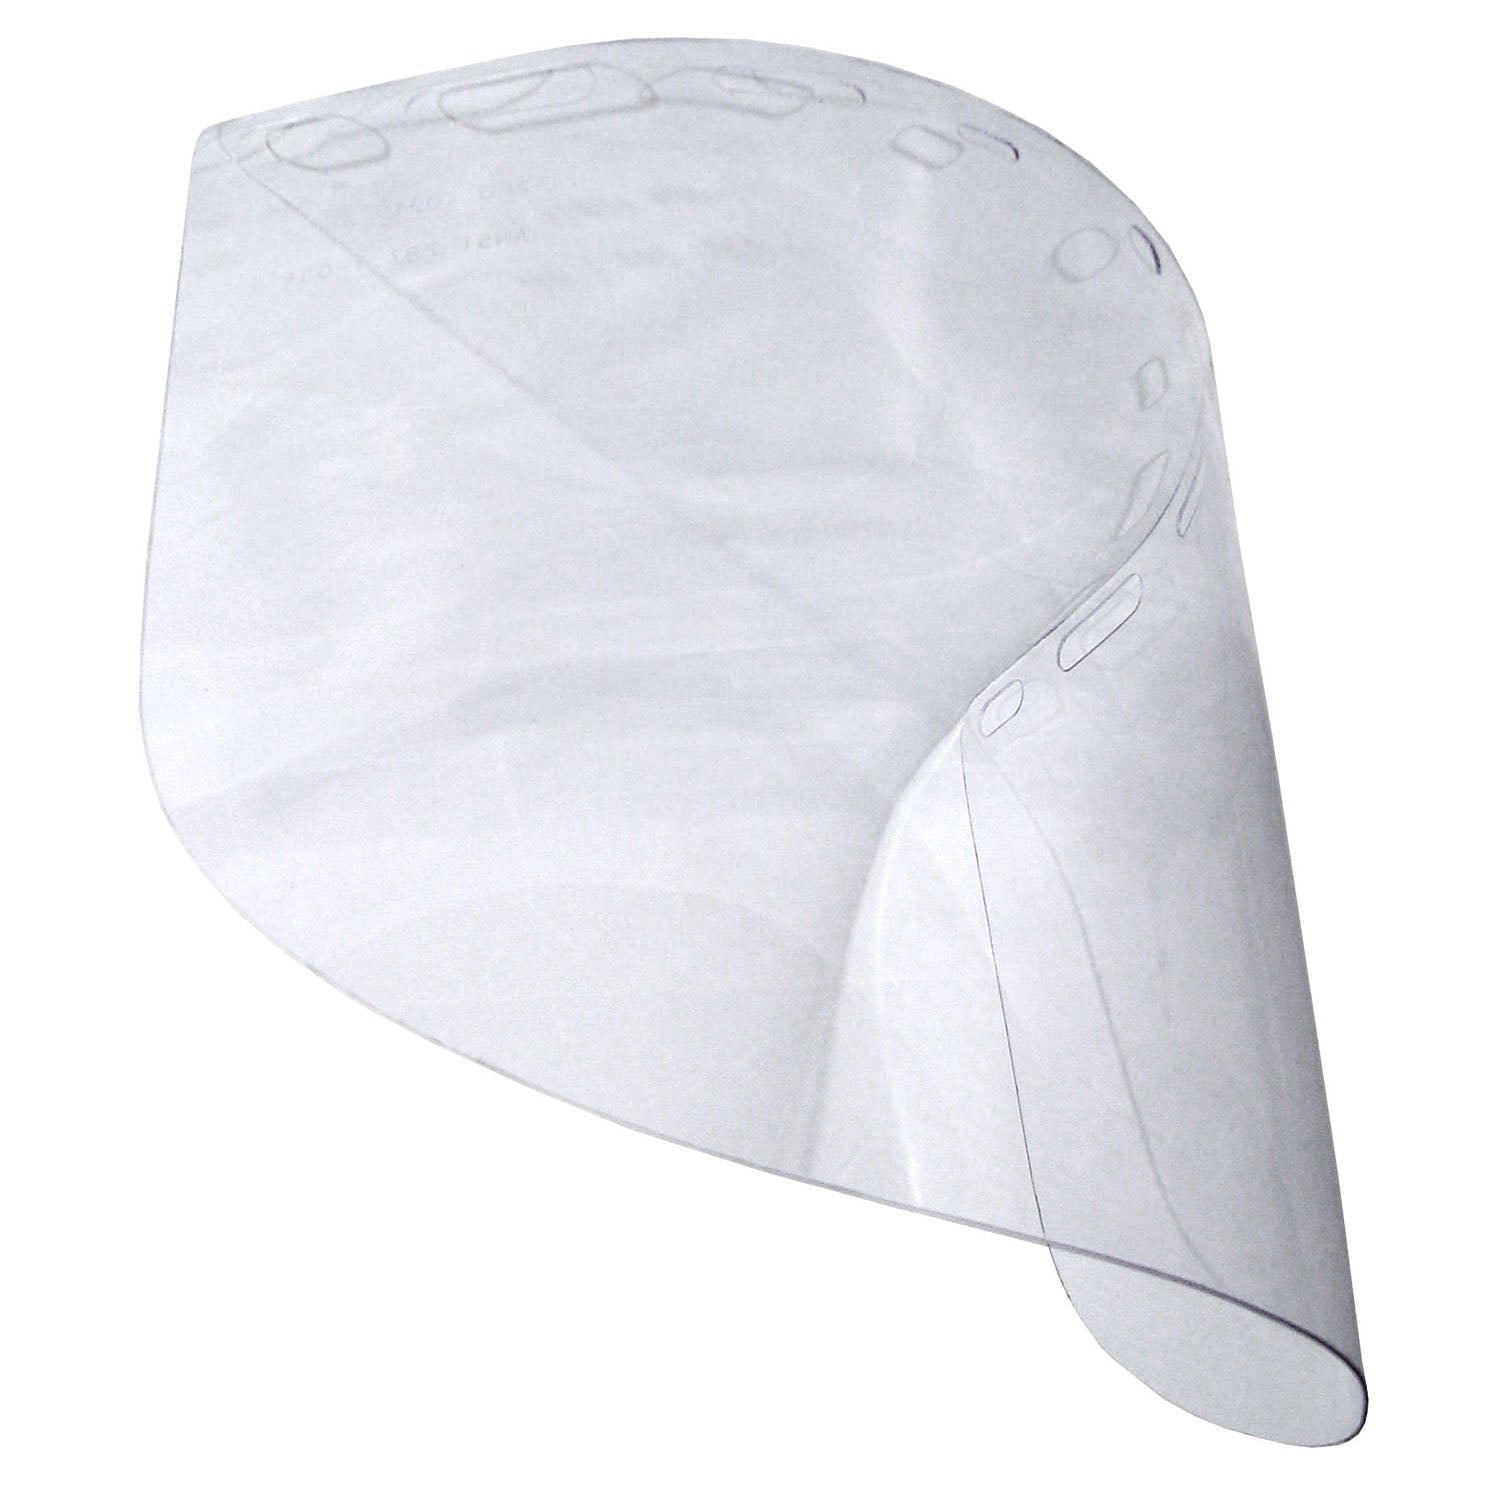 Radians Clear Acetate Face Shield - .040 x 9 x 15 1/2 Clear Acetate